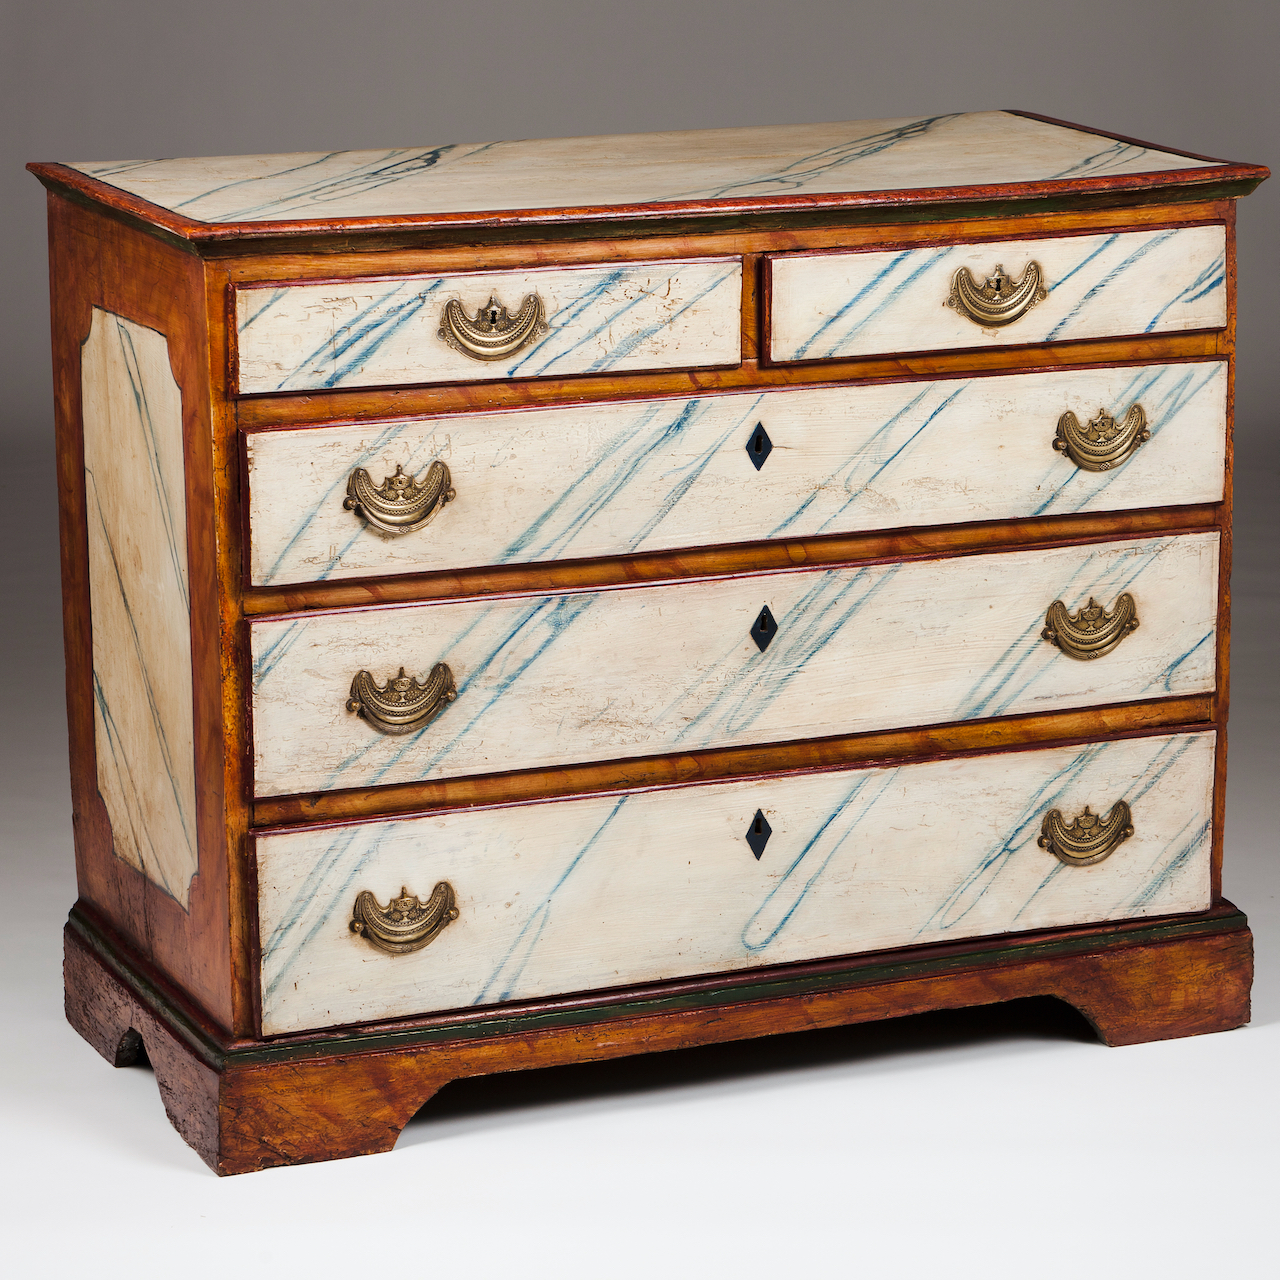 A D.Maria chest of drawersPainted and marbled woodTwo short and two long drawersYellow metal